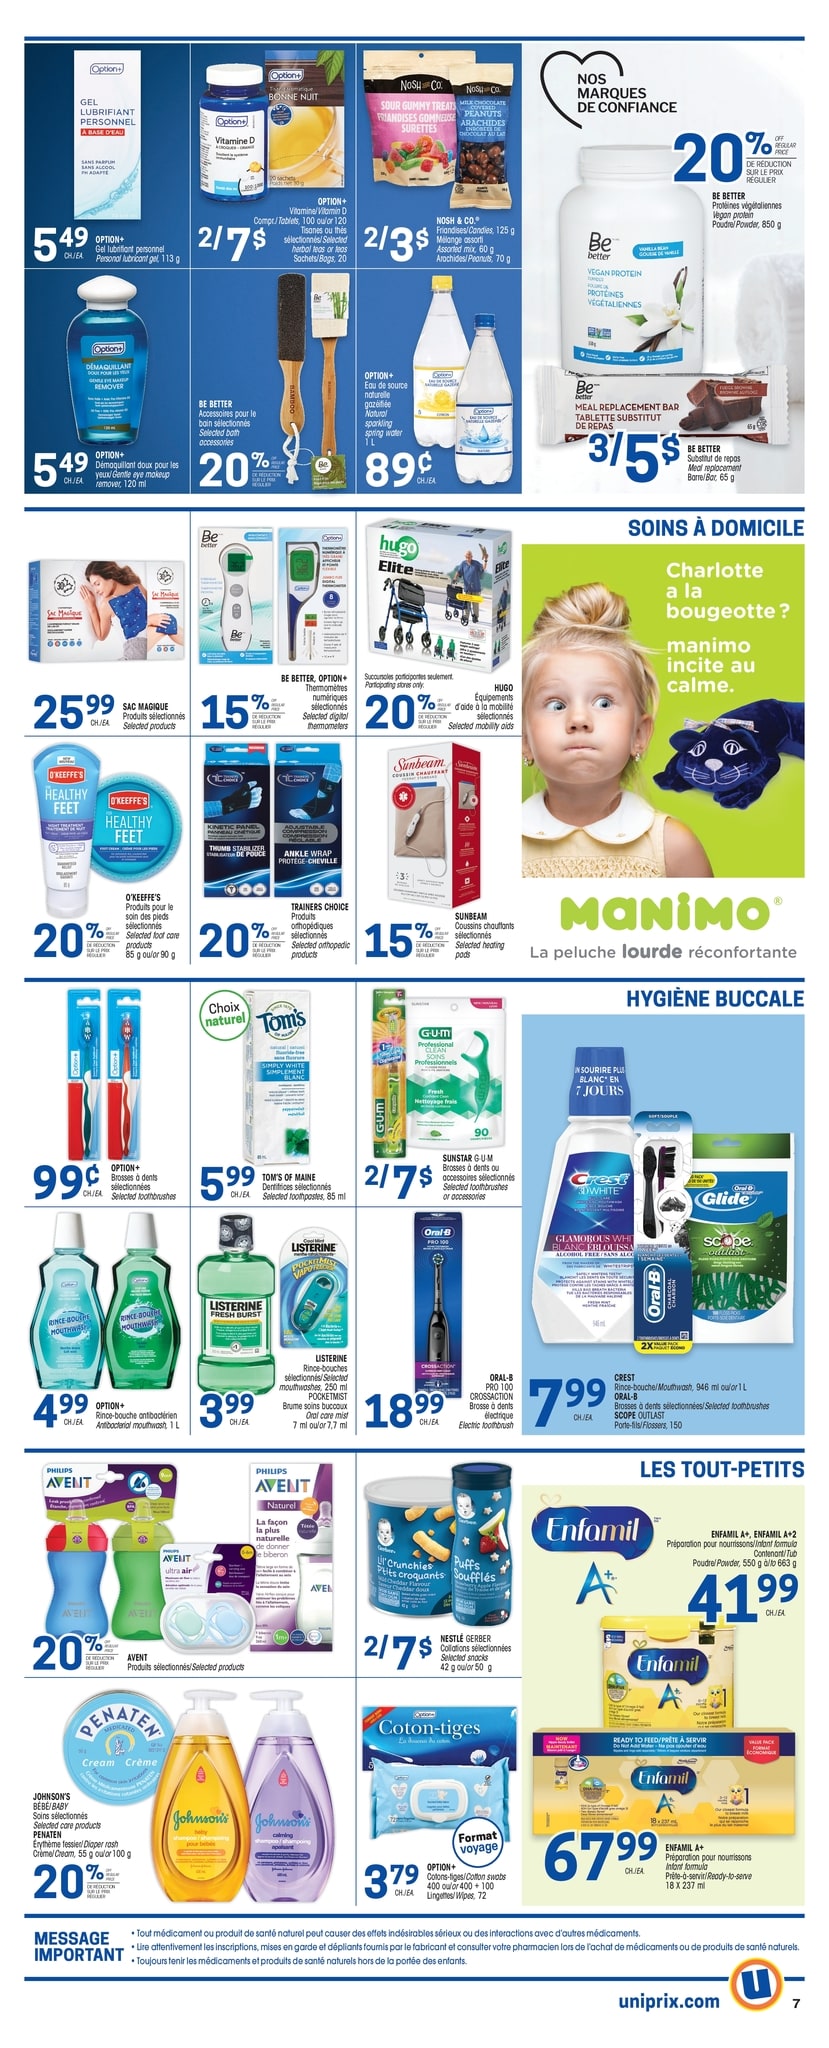 Uniprix - Weekly Flyer Specials - Page 11